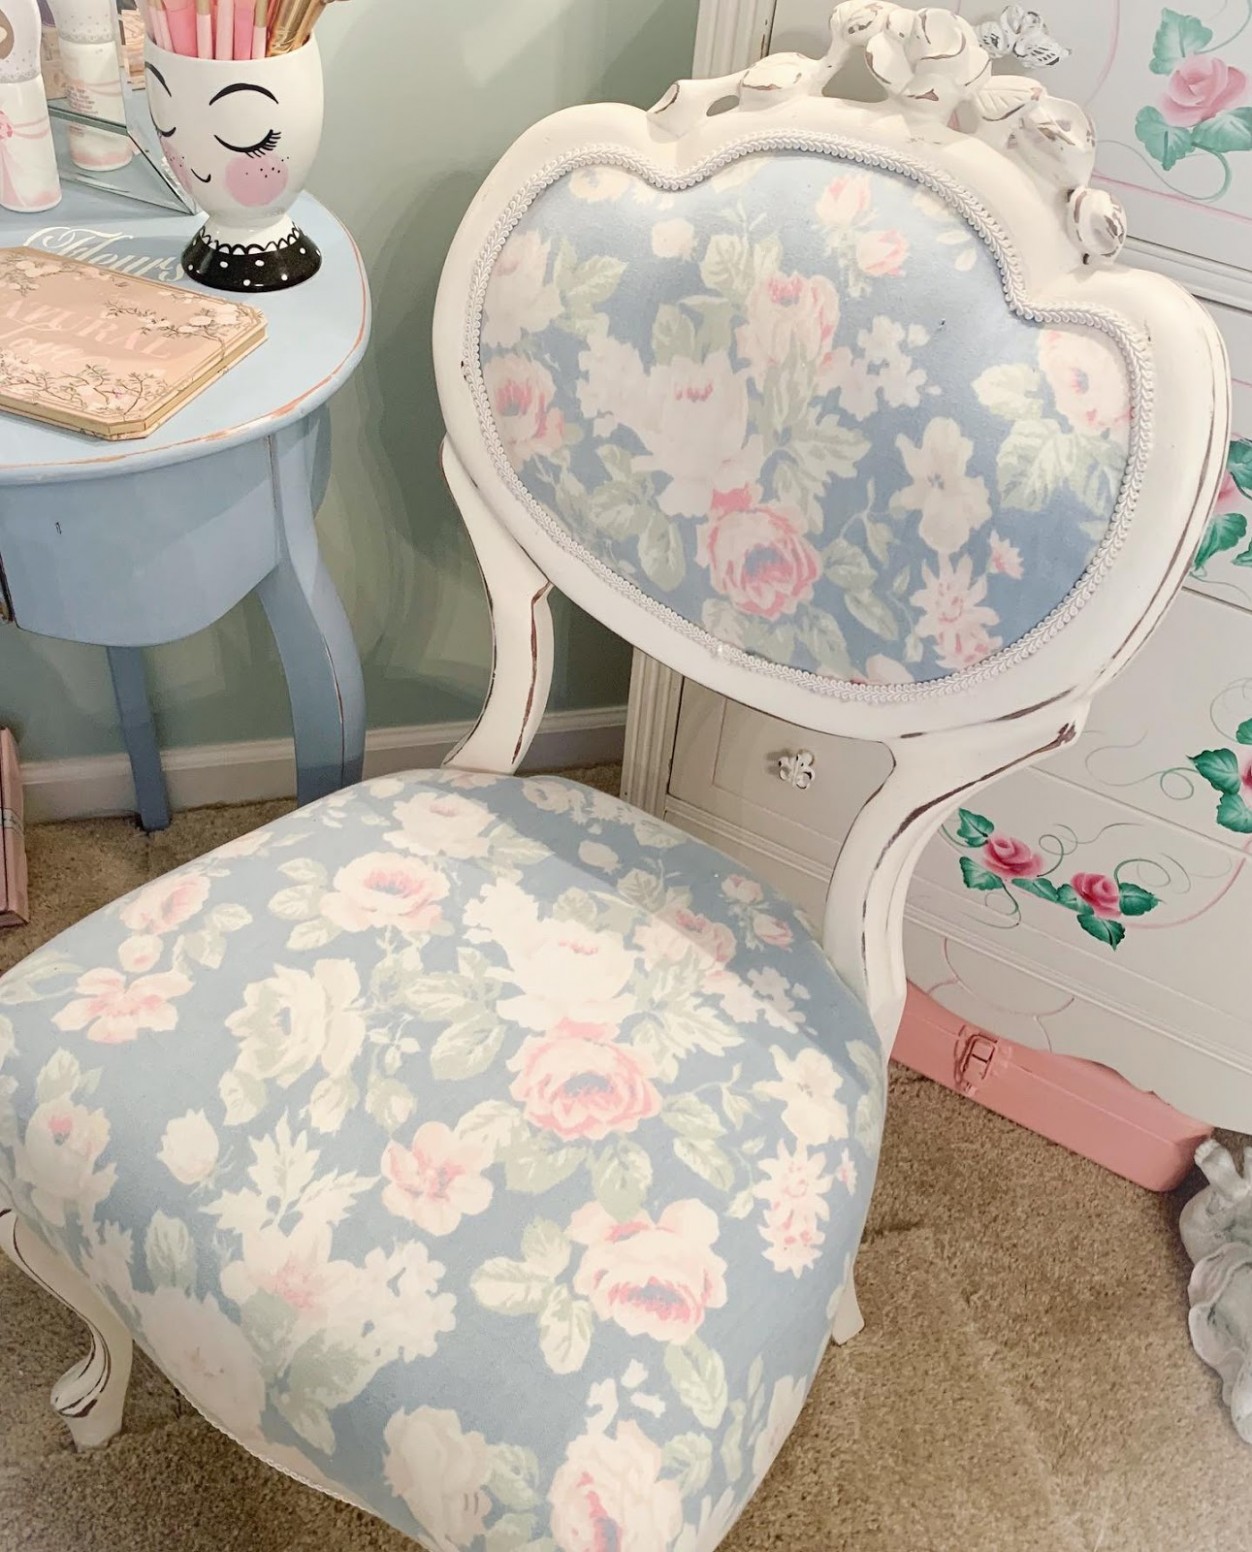 Tea Cottage Pretties: My New Vanity Chair A Furniture Makeover Hobby Lobby Furniture Upholstery Fabric